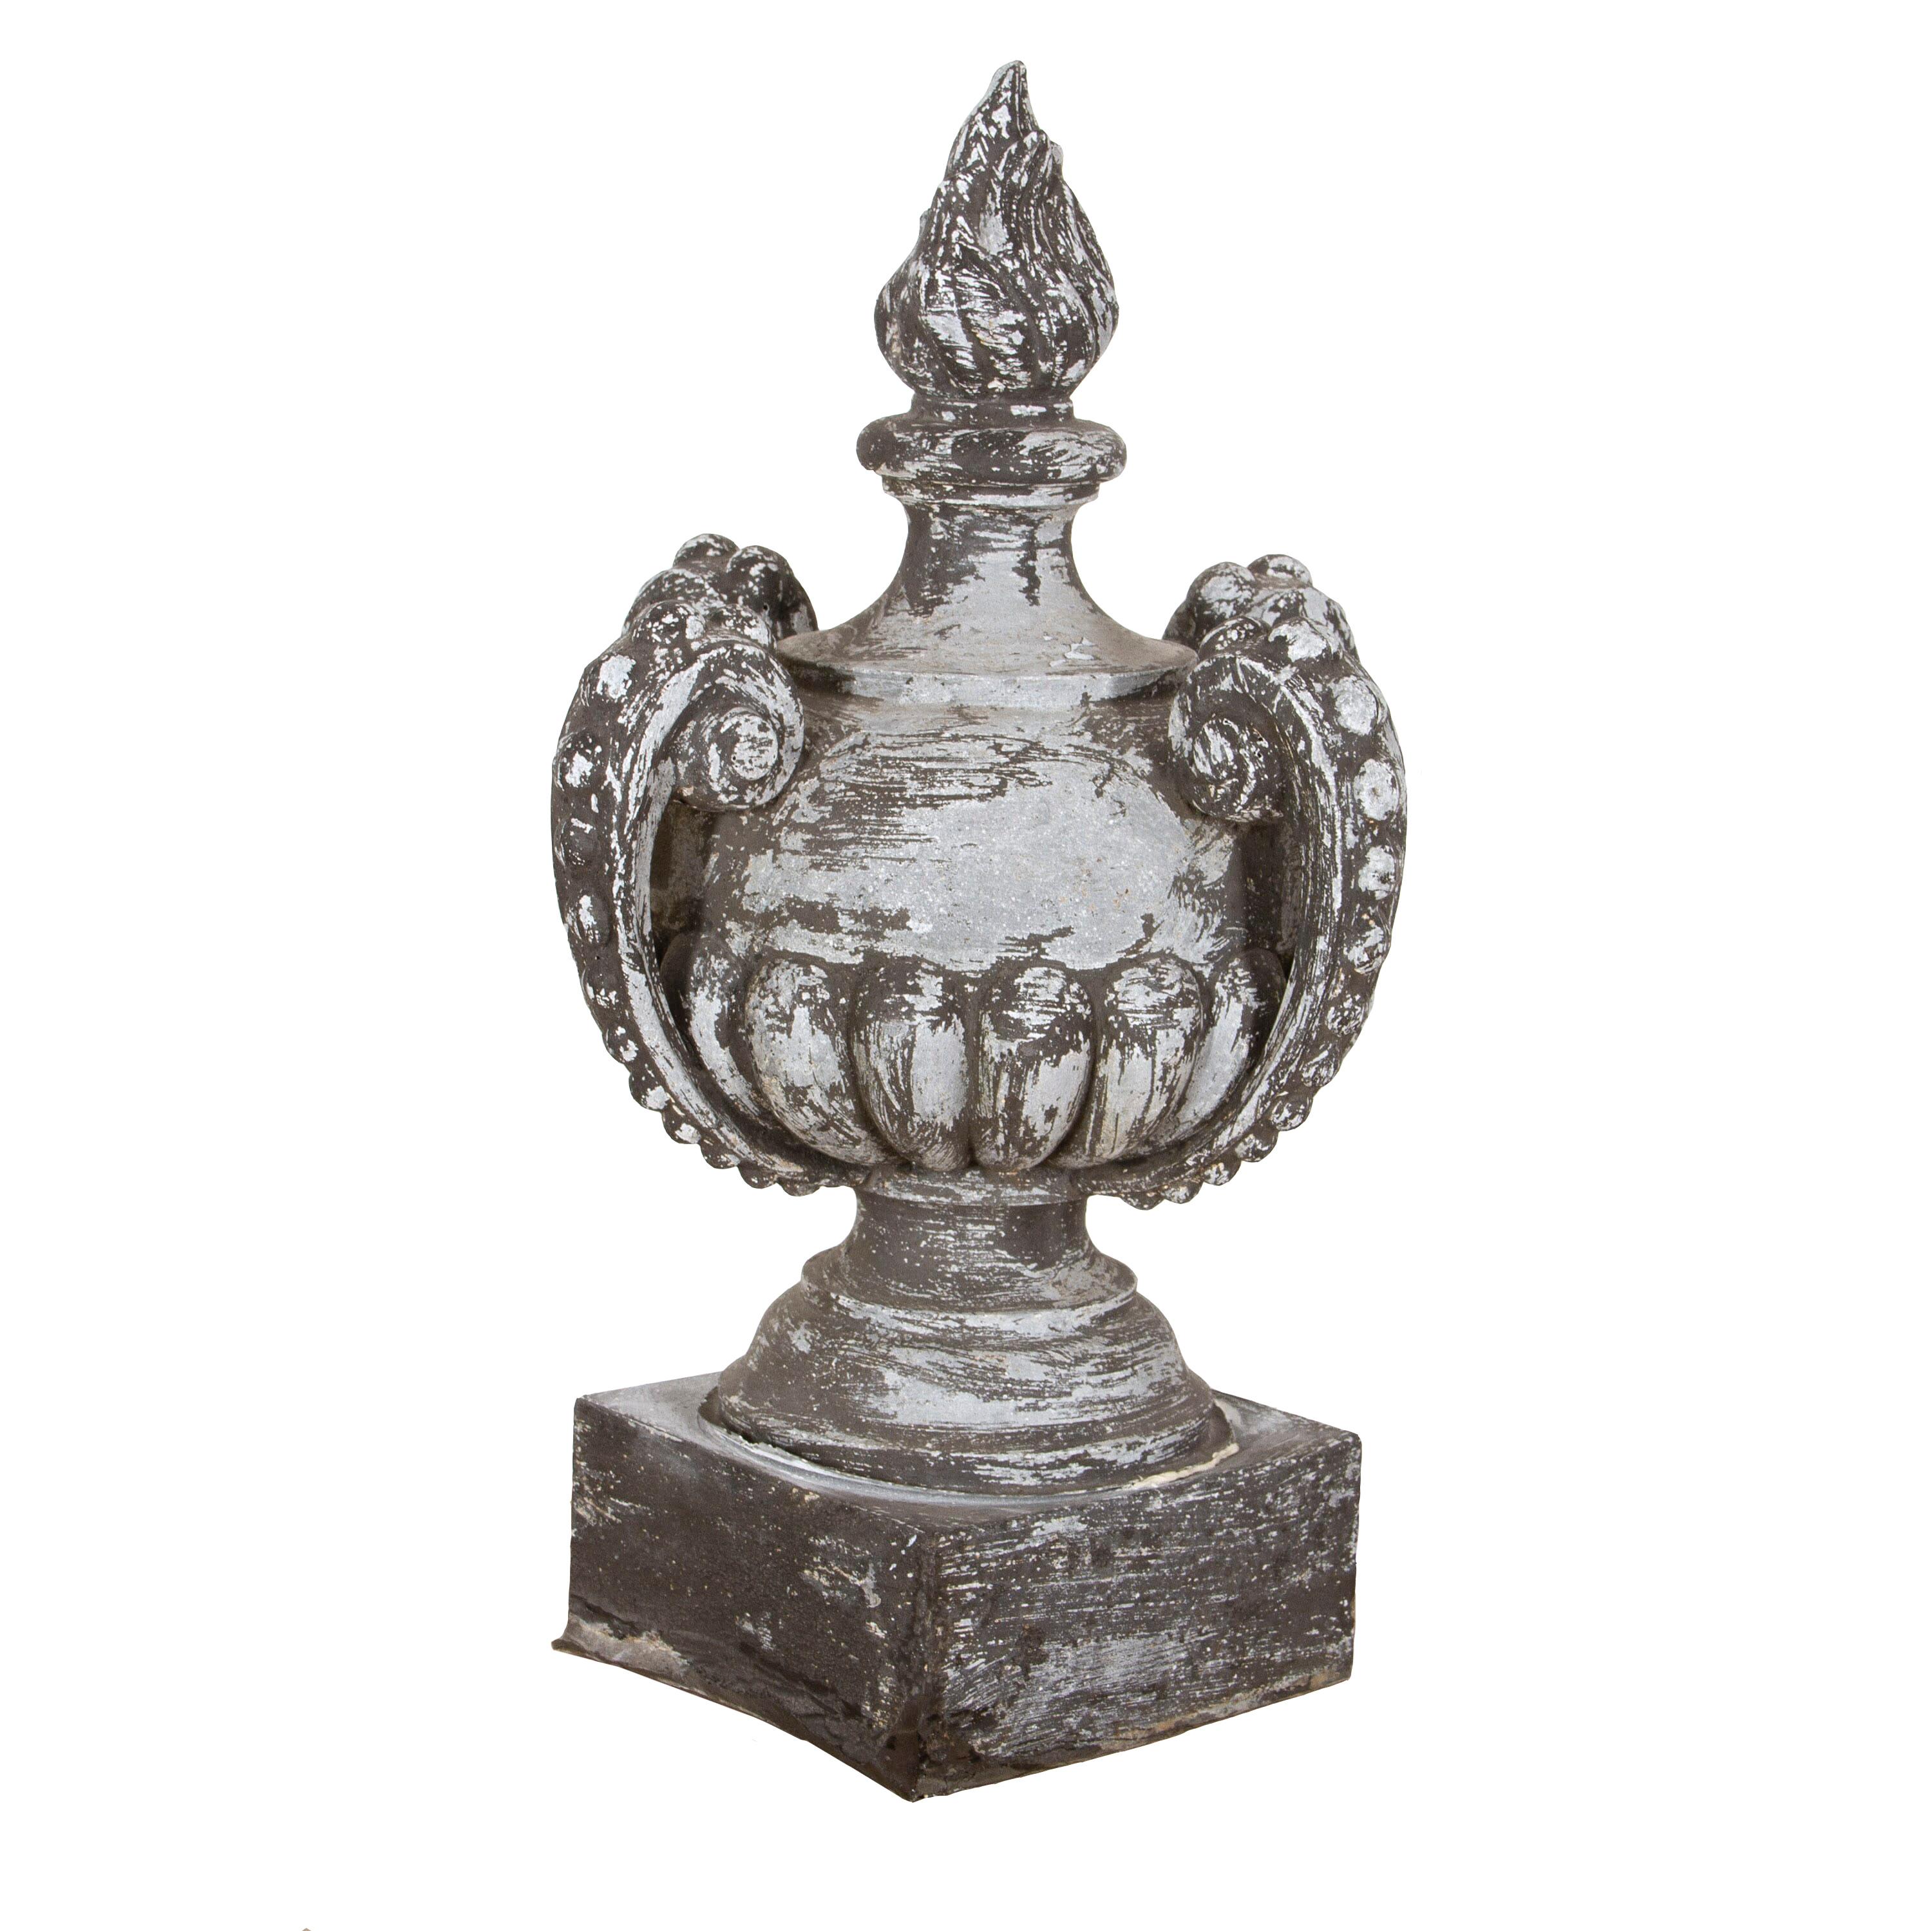 Charming 19th century zinc finial. 
This decorative finial features a detailed flame top with three curved arms and a shapely body. Terminating on a square zinc base. 
A decorative addition that will make for a great feature indoors as well as